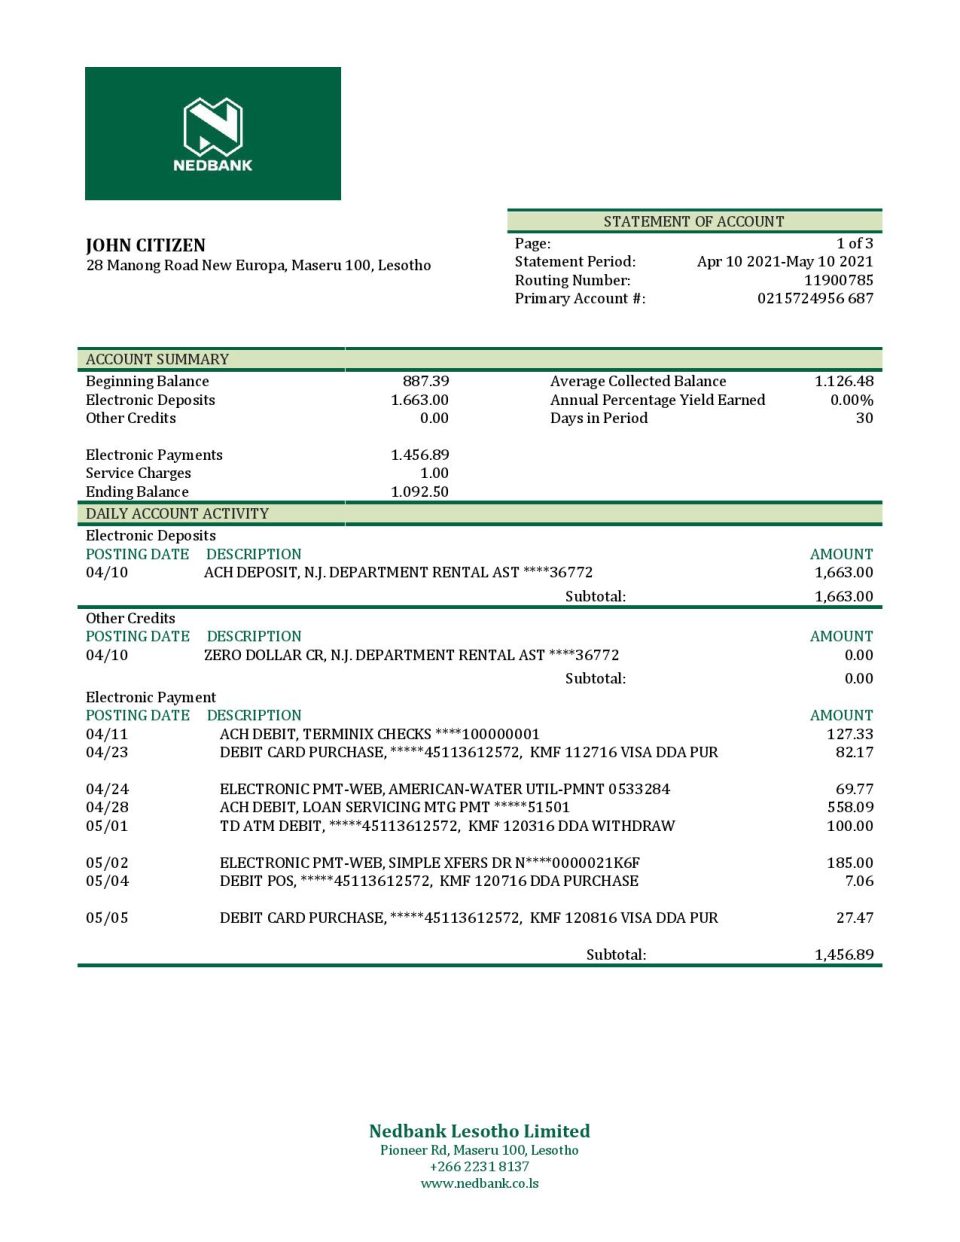 Lesotho Nedbank bank statement template in Word and PDF format